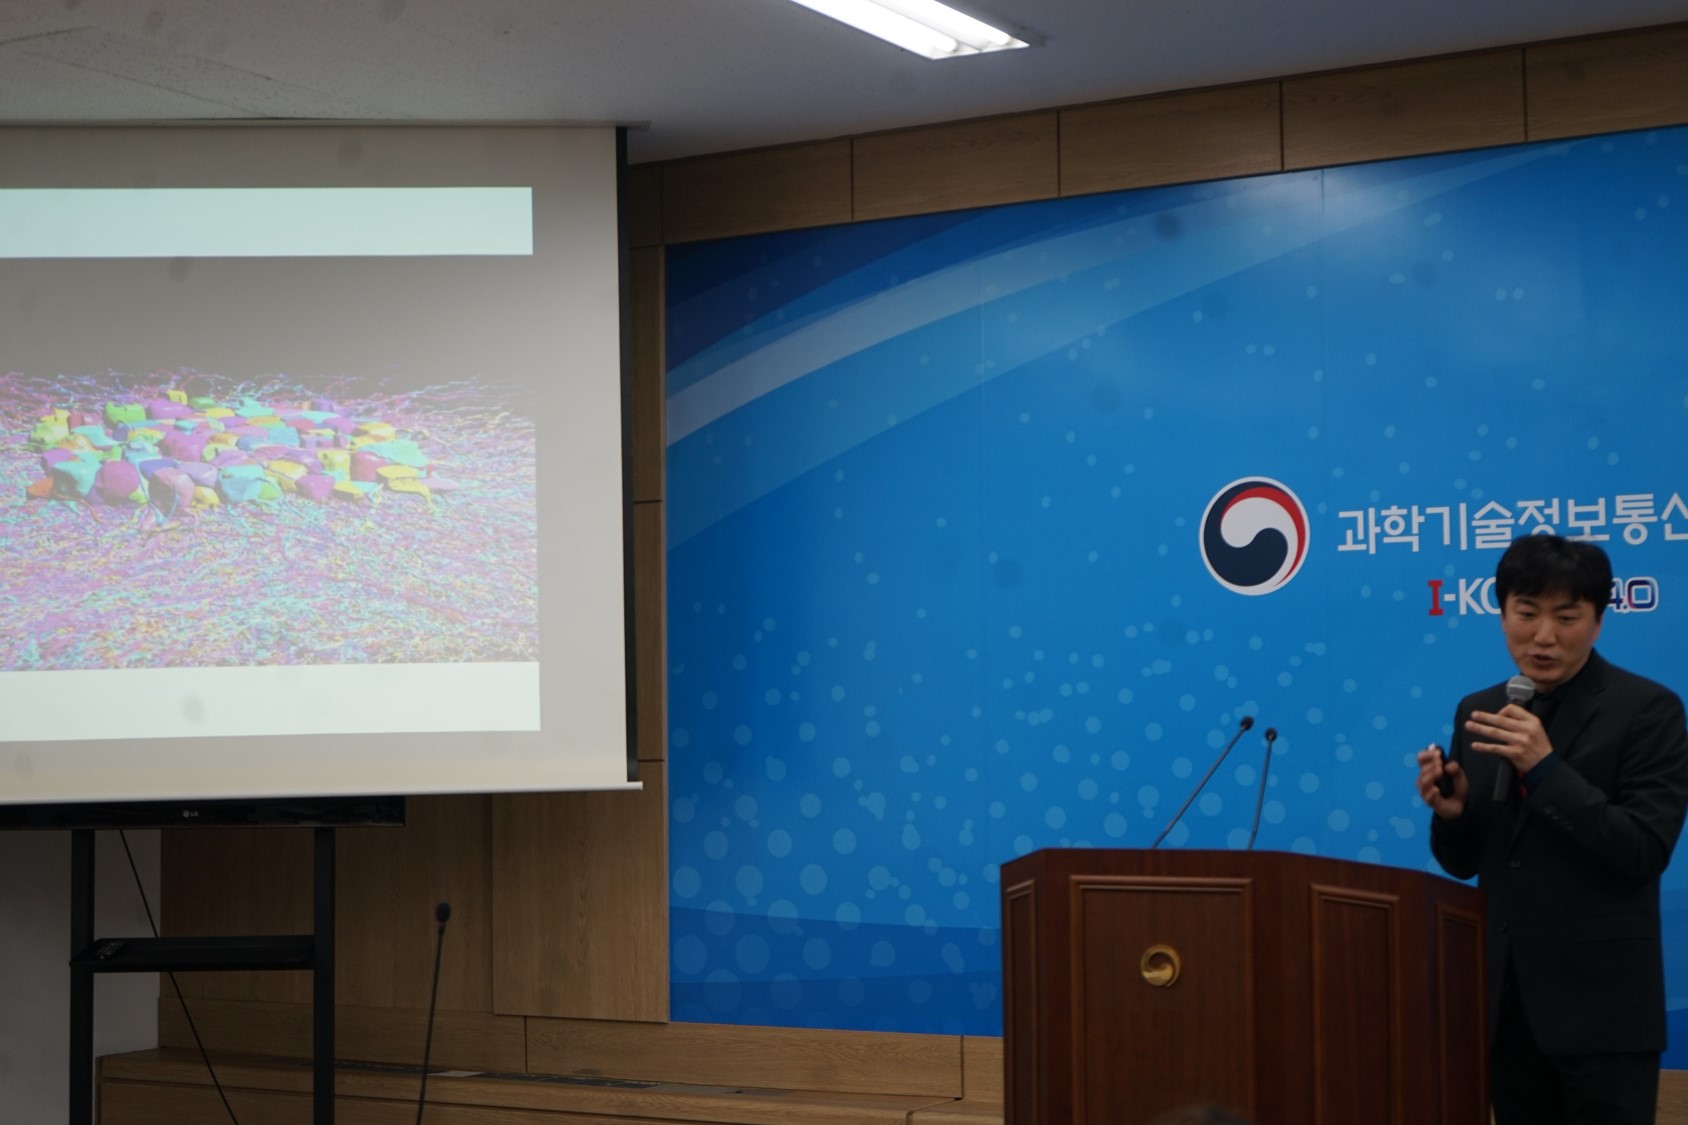 Dr. Jinseop, Kim brifed the press at the Ministry of Science and ICT.